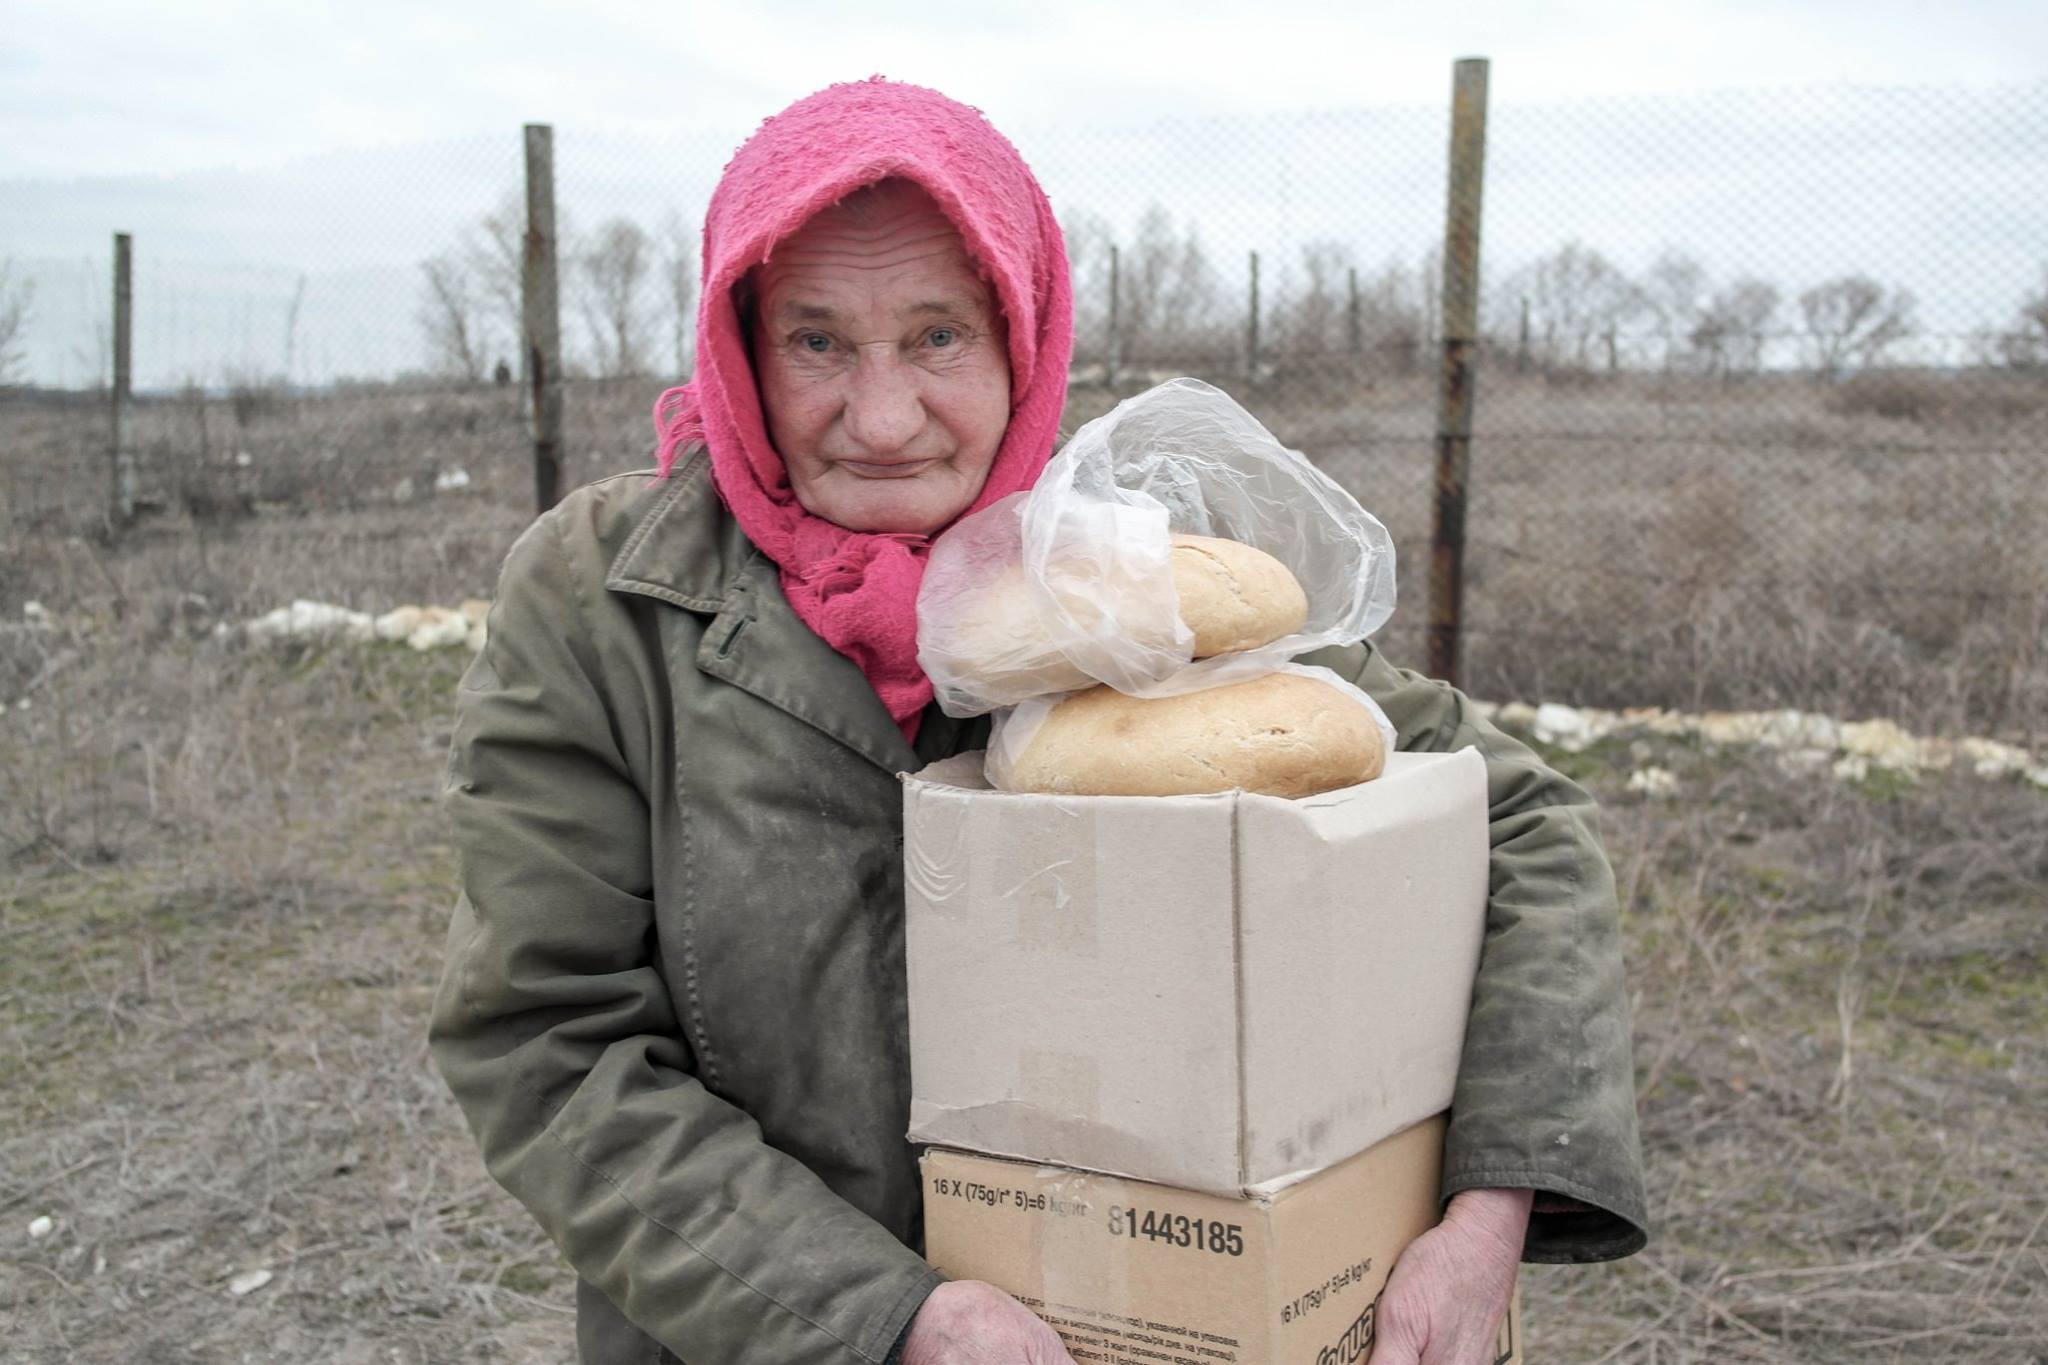 Postup provided aid for people in need in Eastern Ukraine.